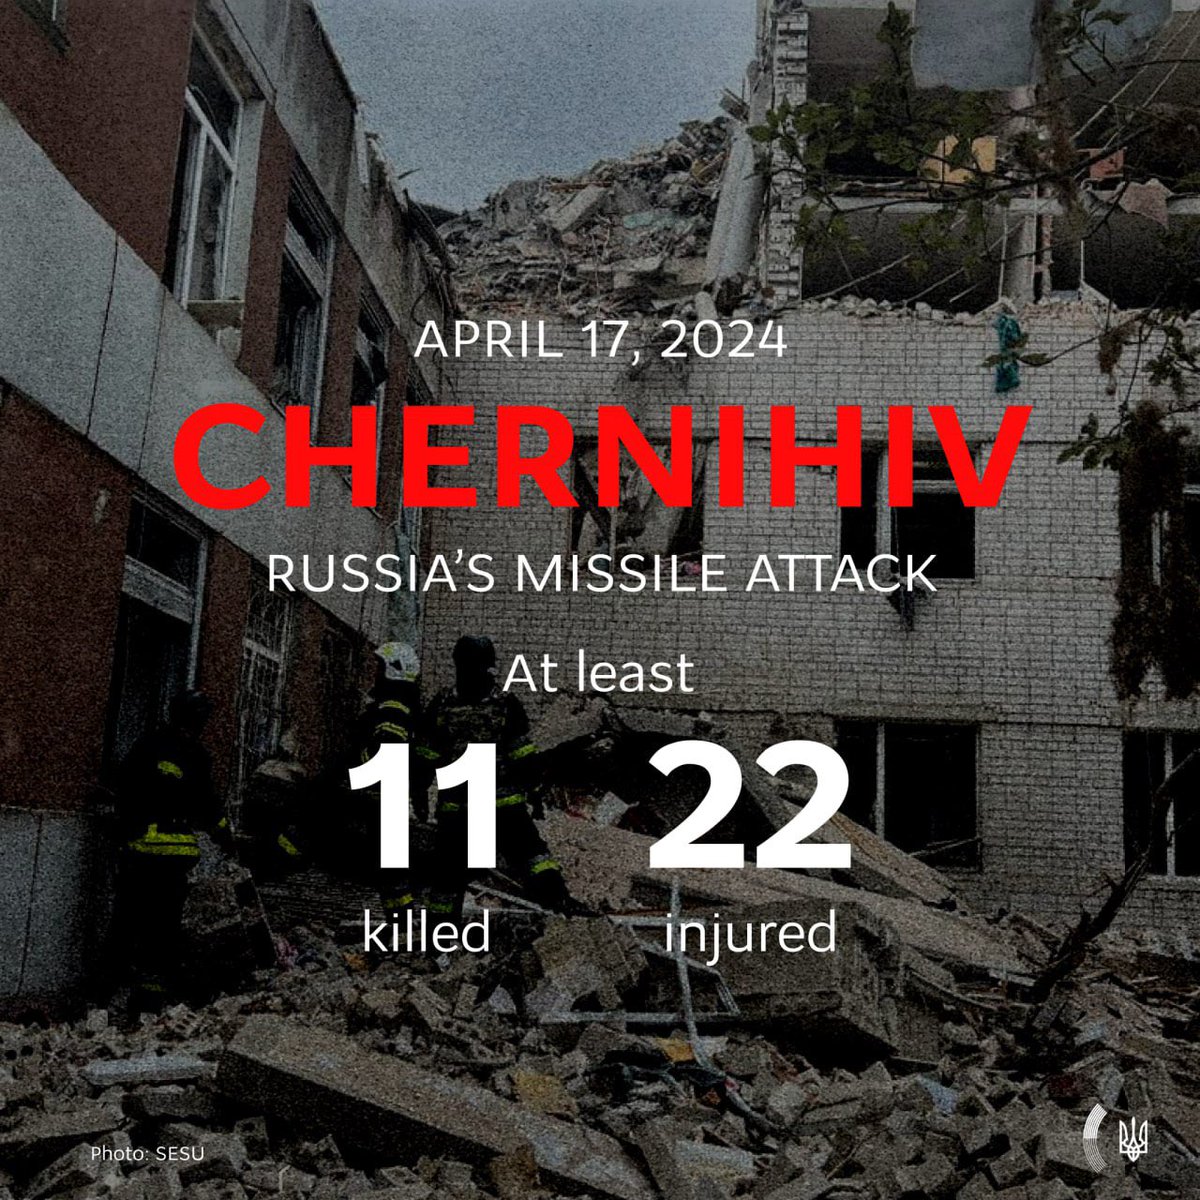 Russia attacked almost the very center of #Chernihiv. The missile strike took the lives of at least 11 civilians, 22 more were injured. Ukraine urgently needs more Patriot systems. Russia’s terror knows no stop, but we can prevent deaths of people. #PatriotsSaveLives